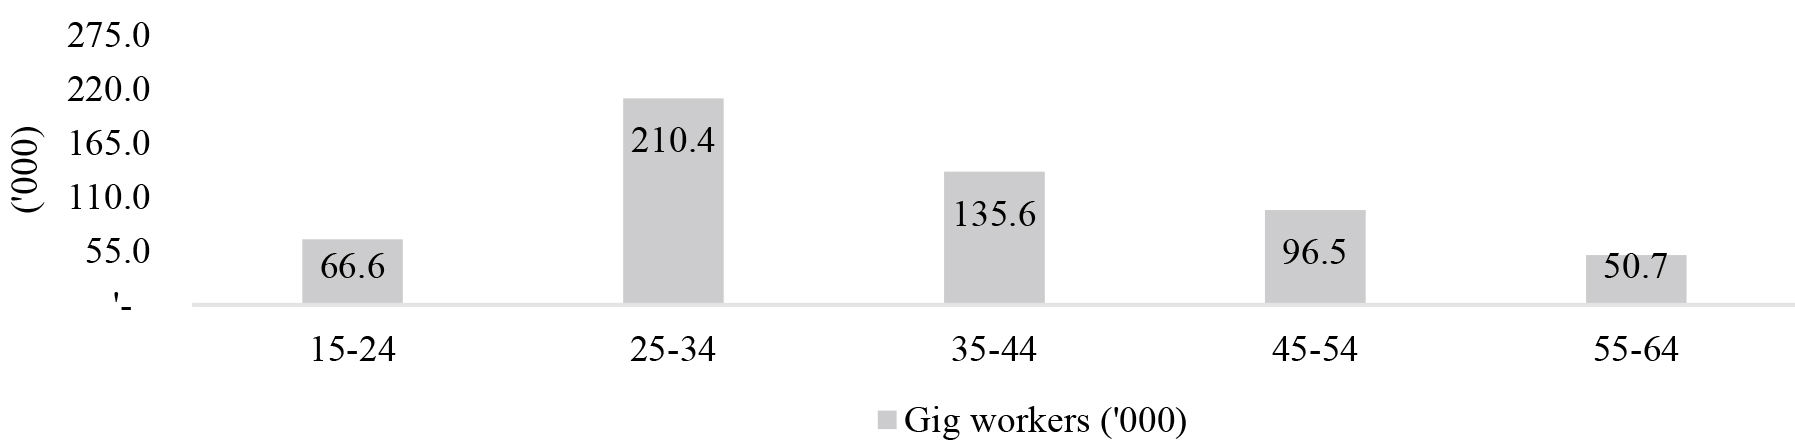 Number and share of gig workers by age group, Malaysia, 2018. Source: Authors’ estimates based on 2018 Labour Force Survey data, (DOSM).